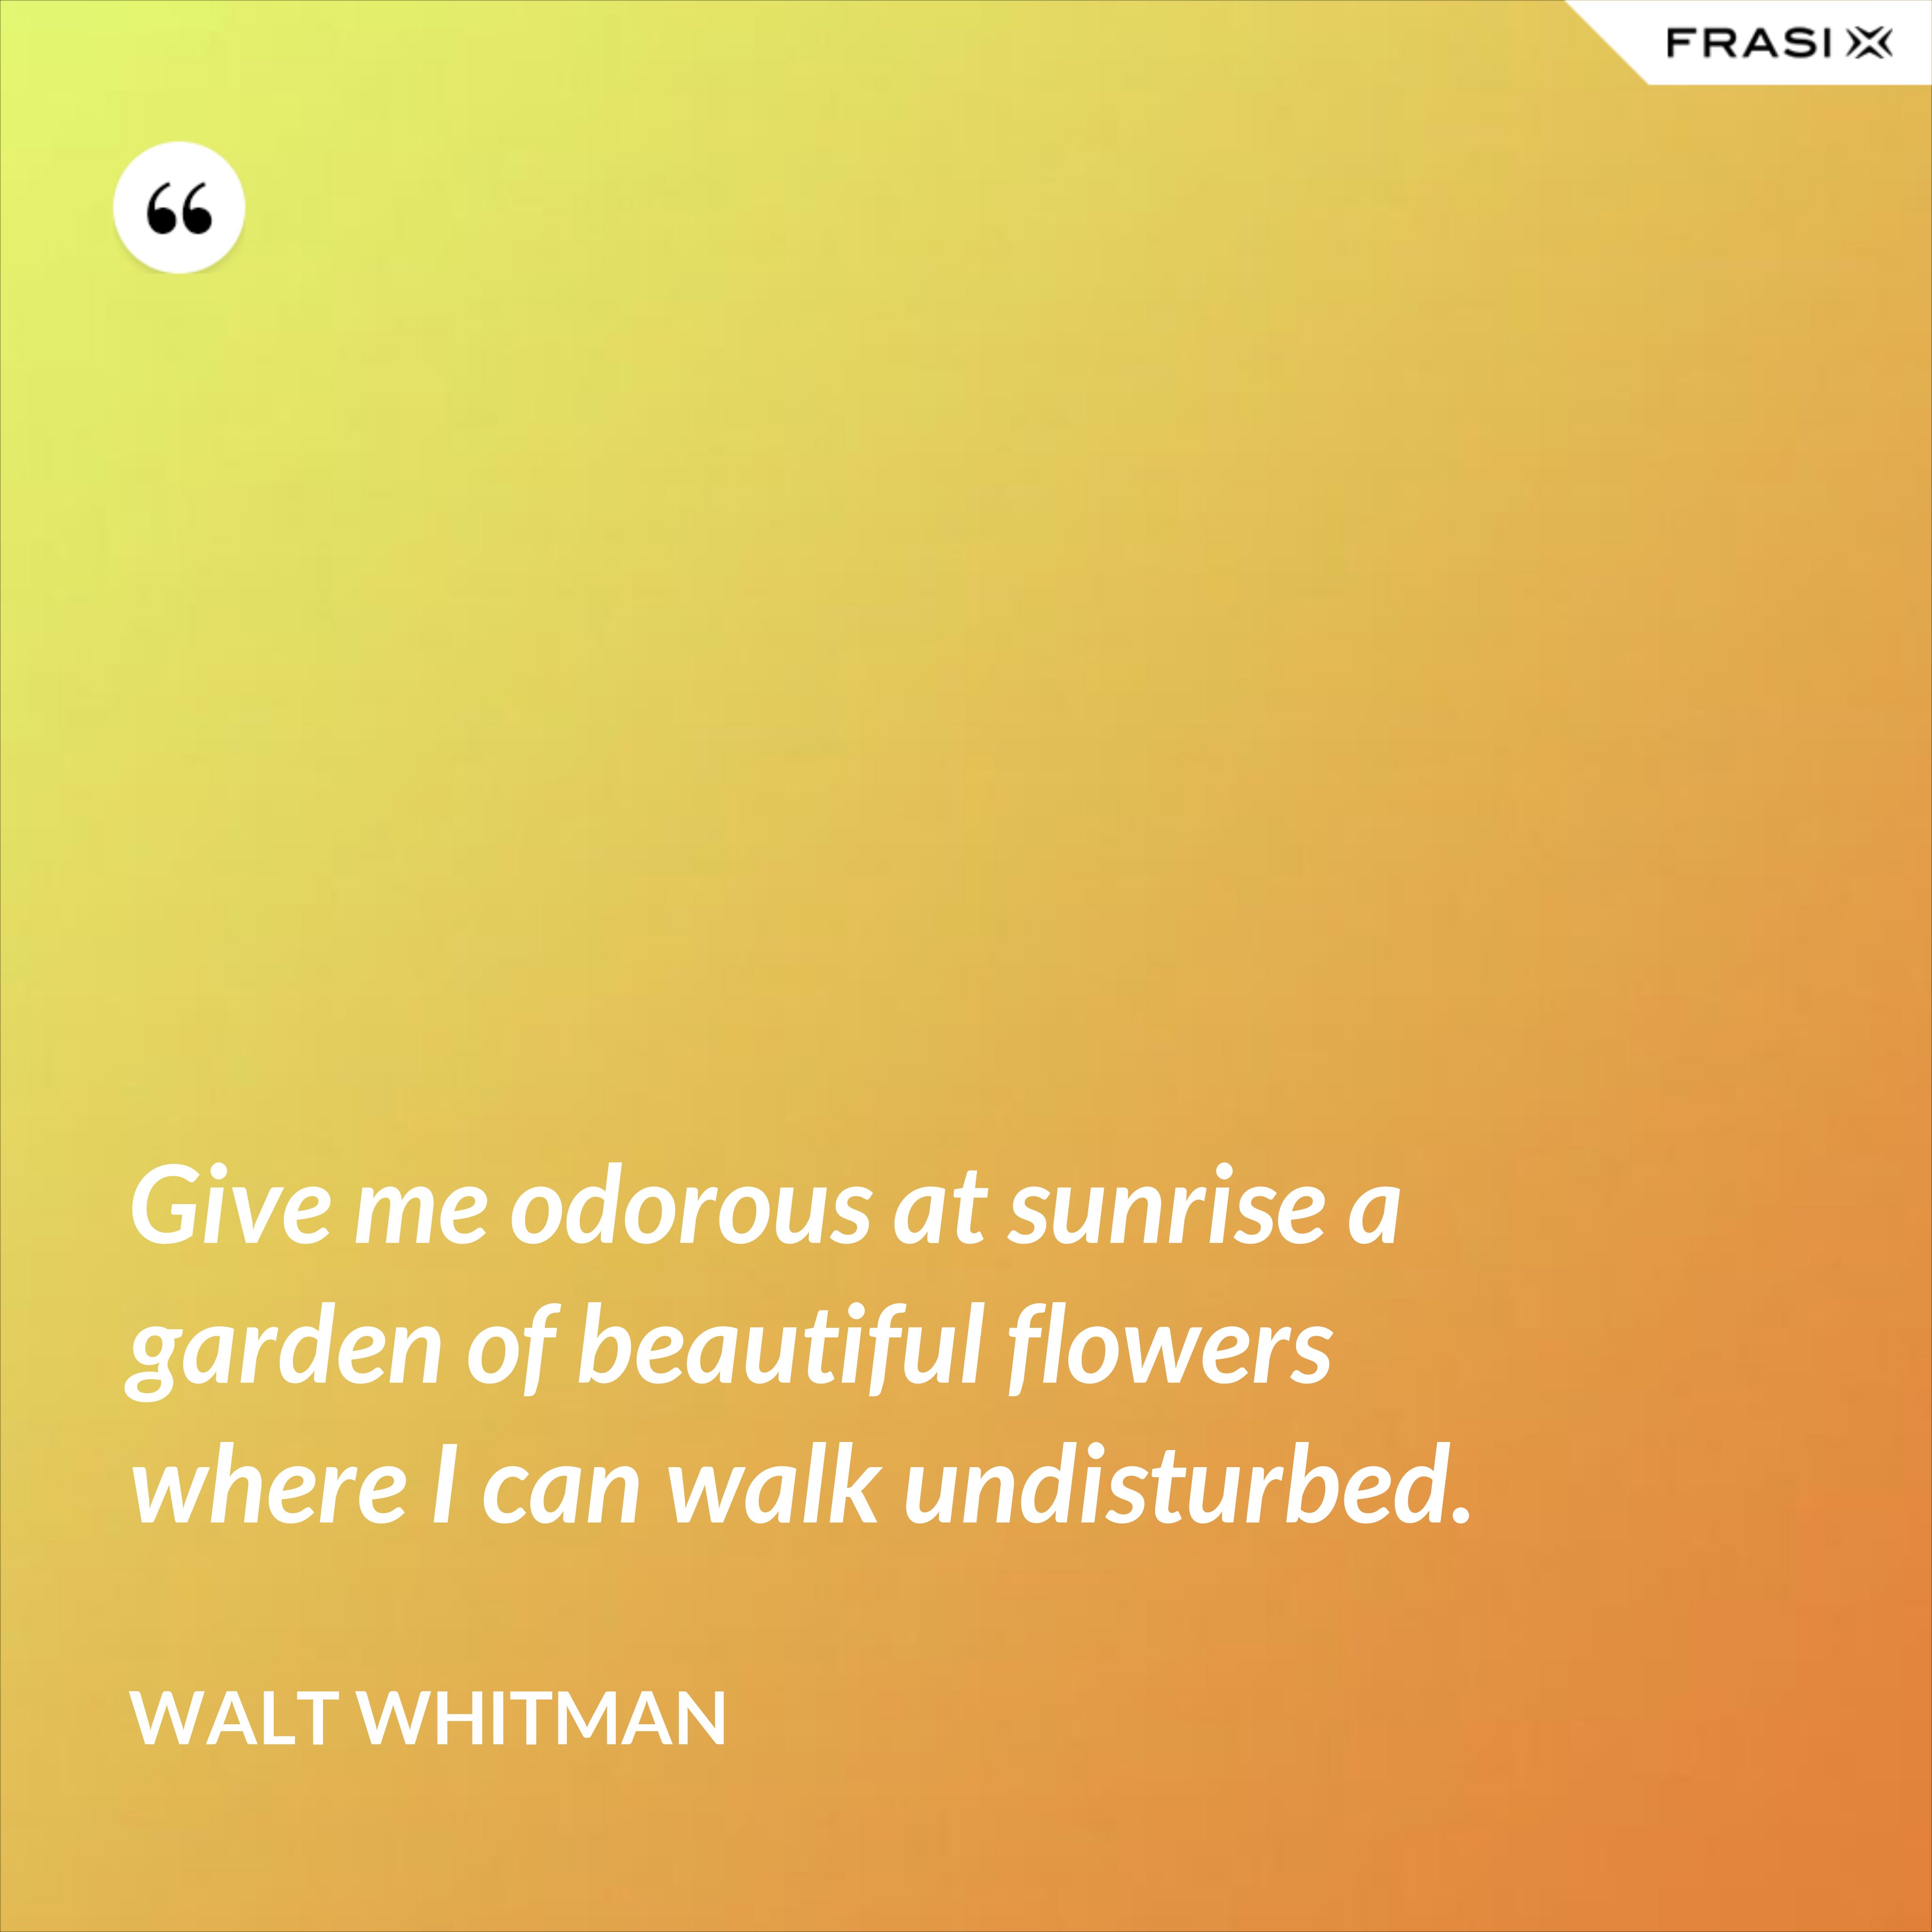 Give me odorous at sunrise a garden of beautiful flowers where I can walk undisturbed. - Walt Whitman